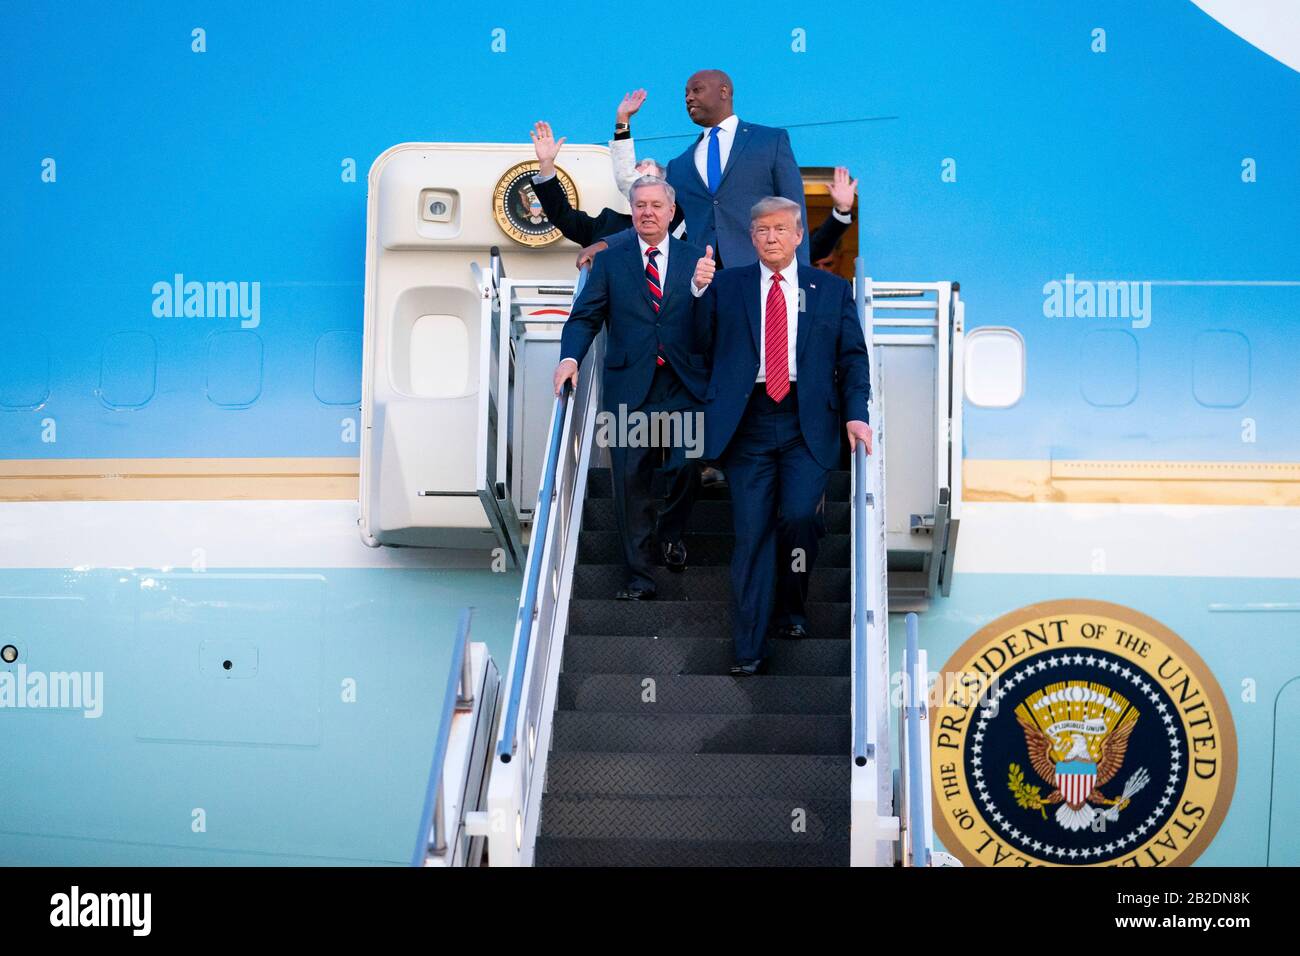 U.S President Donald Trump waves to supporters as he disembarks Air Force One accompanied by Senators Lindsey Graham and Tim Scott at Charleston International Airport February 28, 2020 in Charleston, S.C. Trump arrived Charleston to hold a campaign rally on the eve of the Democratic primary in the state. Stock Photo